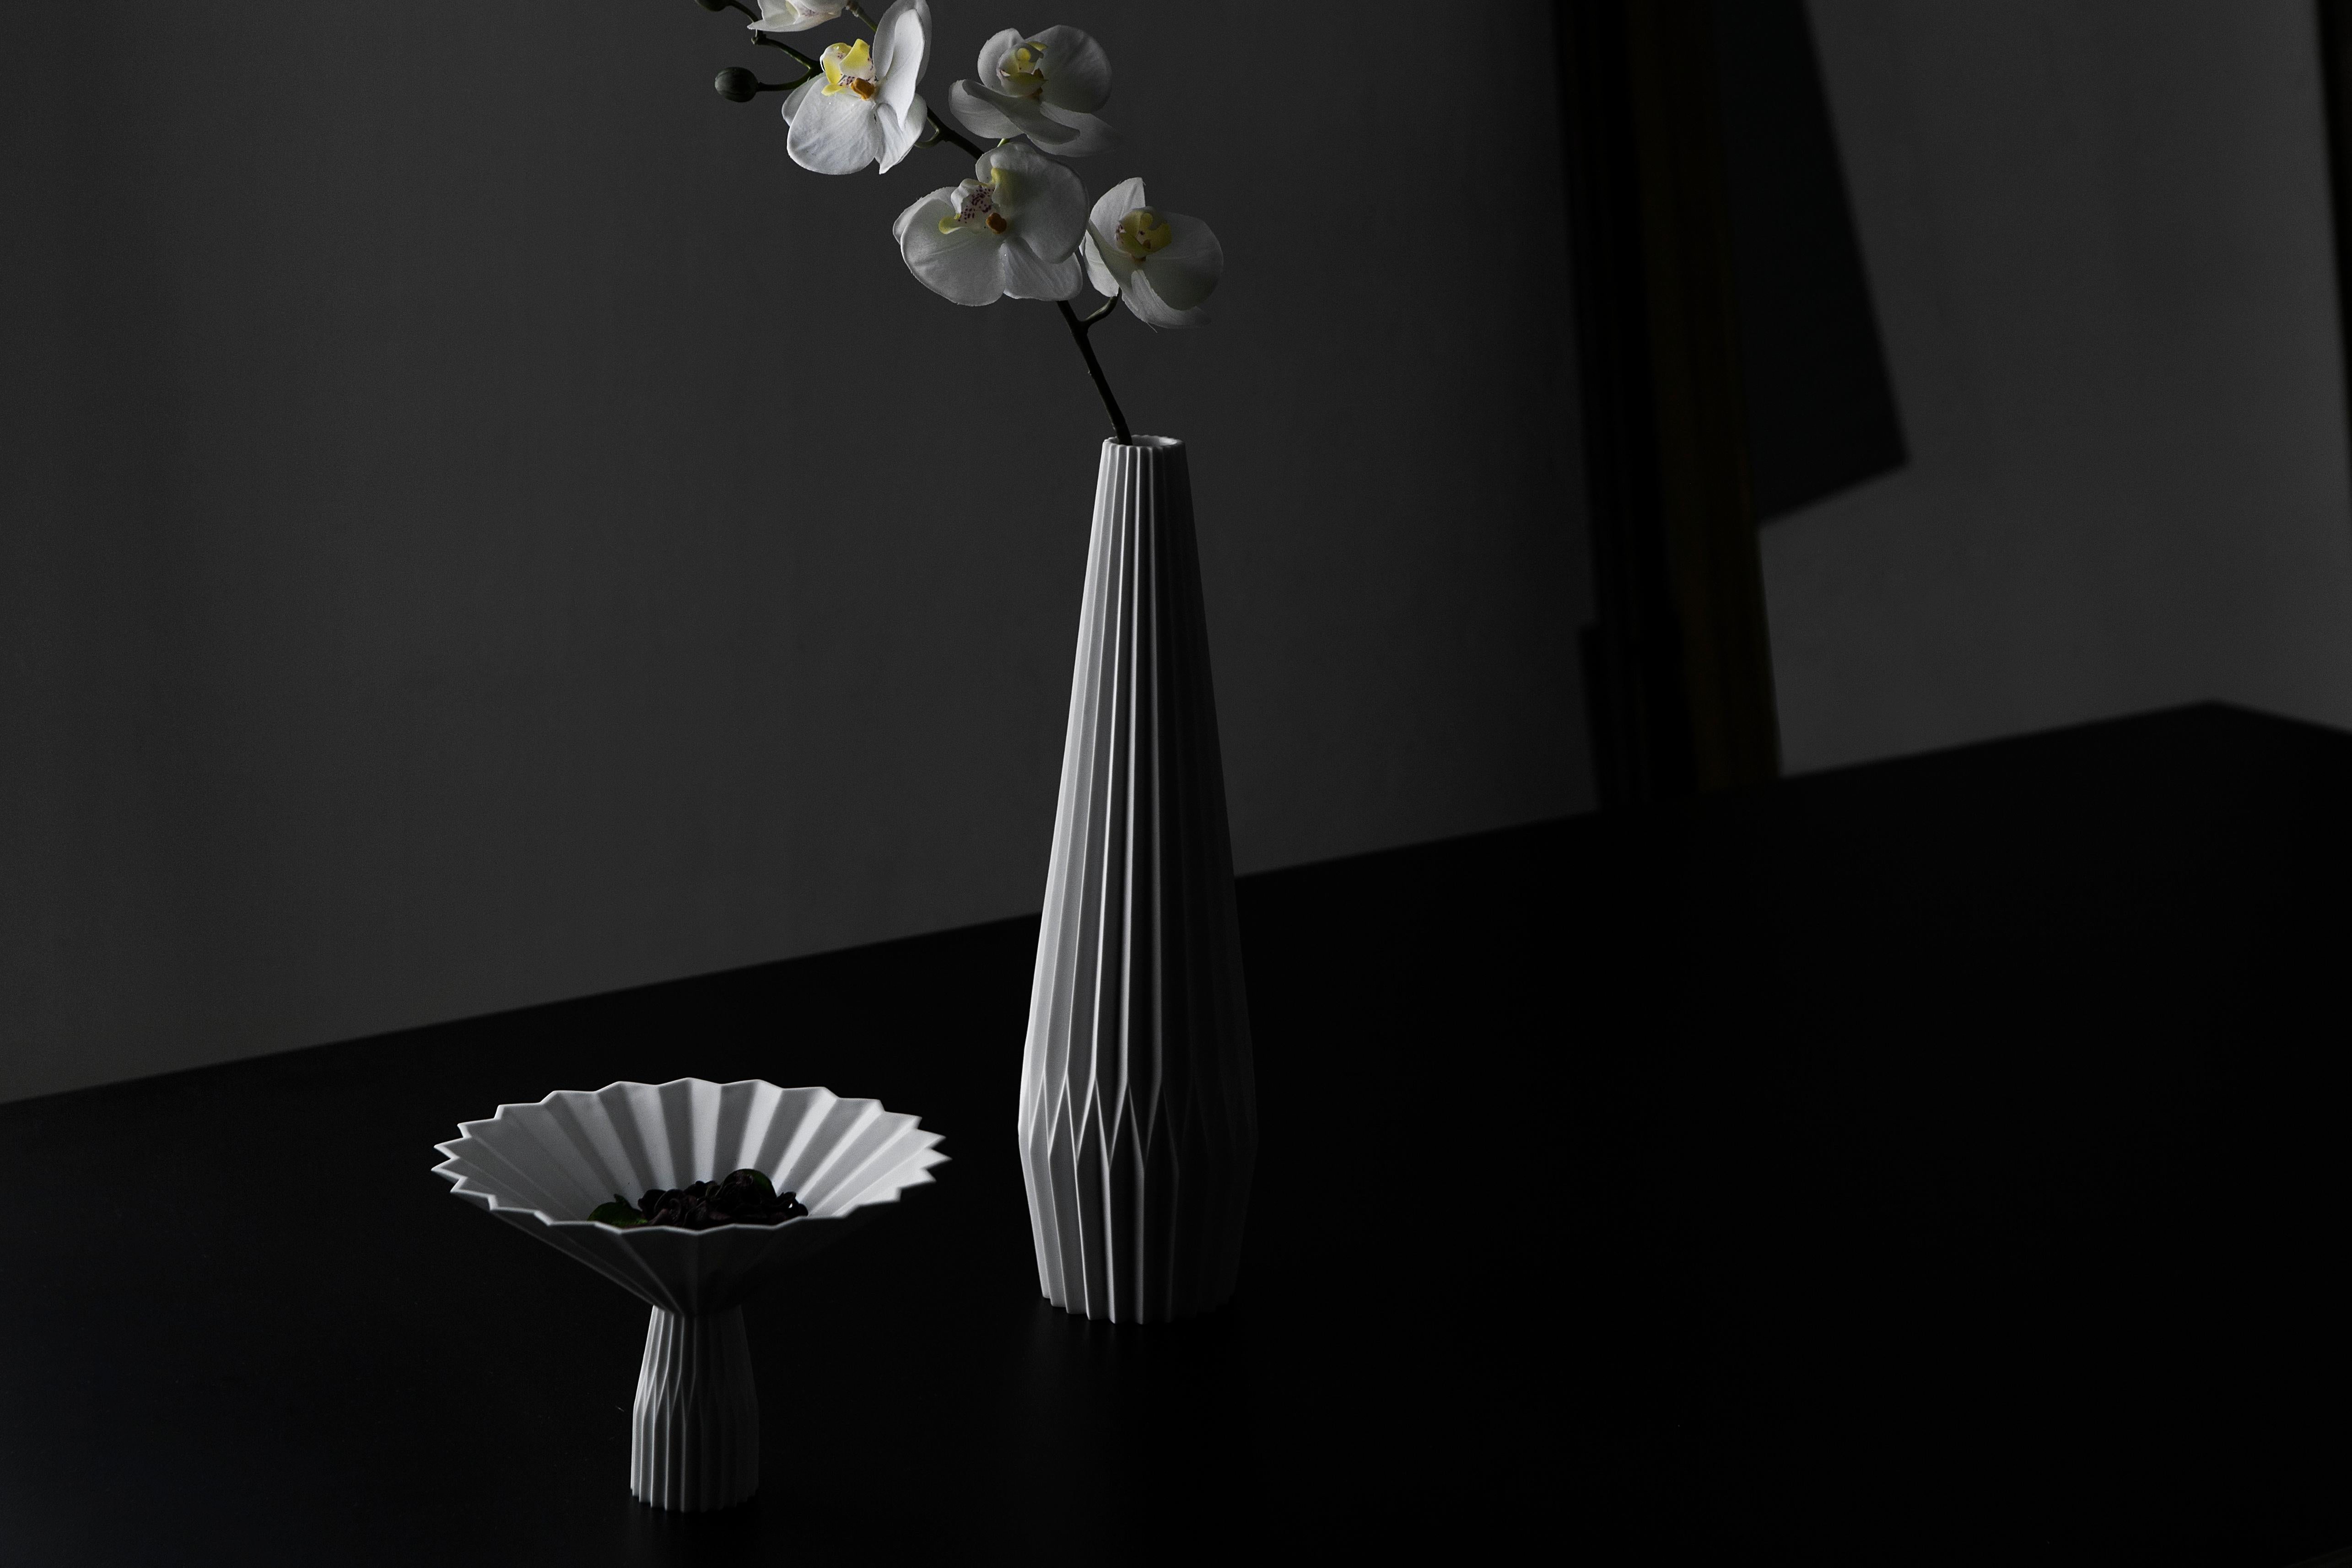 This centerpiece is designed by Denis Guidone and handmade in Japan by Risogama for Hands on design, a traditional pottery. It reminds the Japanese tradition of Origami, the designer uses the white Arita porcelain like paper and lighten the